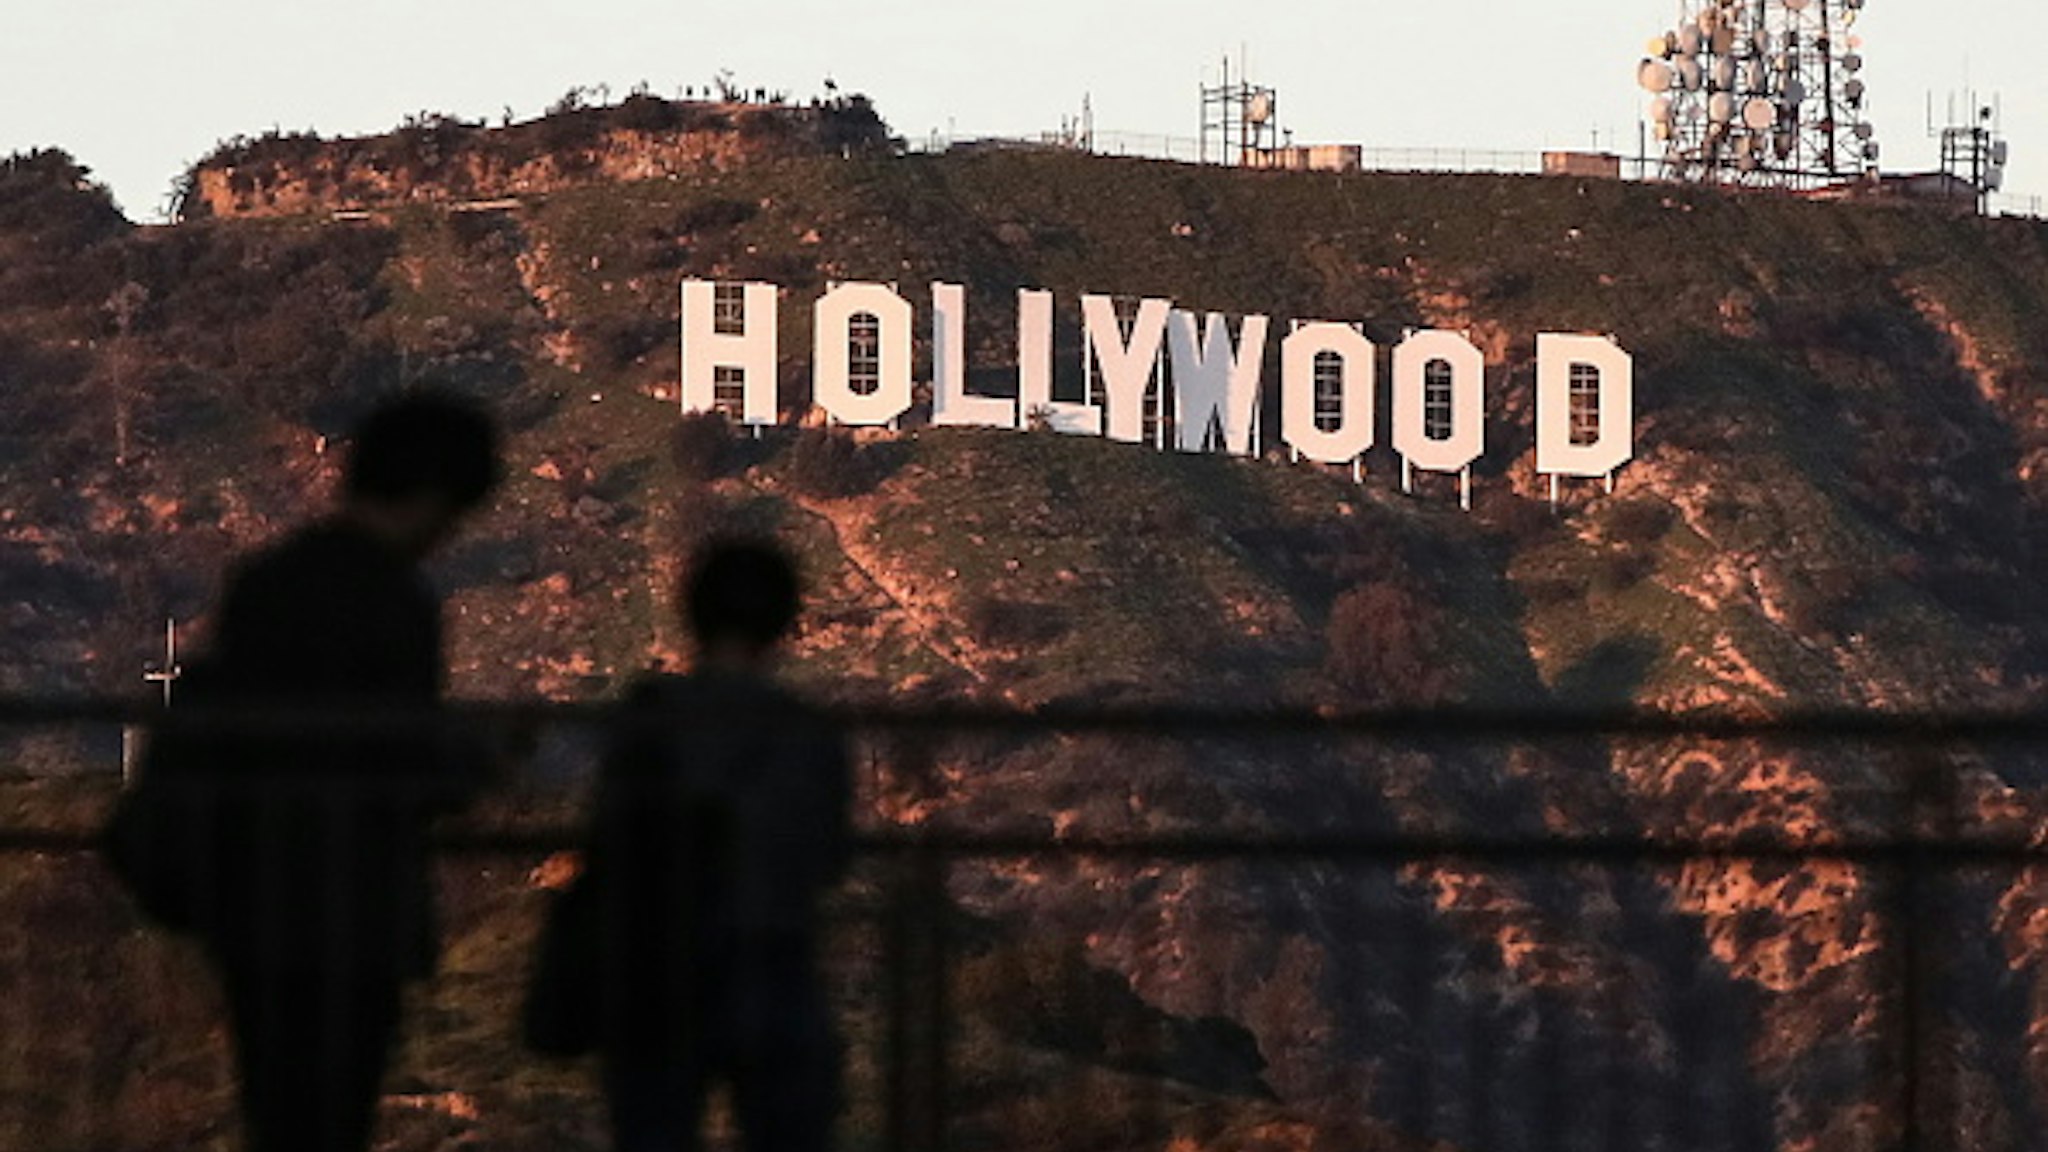 LOS ANGELES, USA - JANUARY 25, 2019: A view of the Hollywood Sign on the Hollywood Hills. Valery Sharifulin/TASS